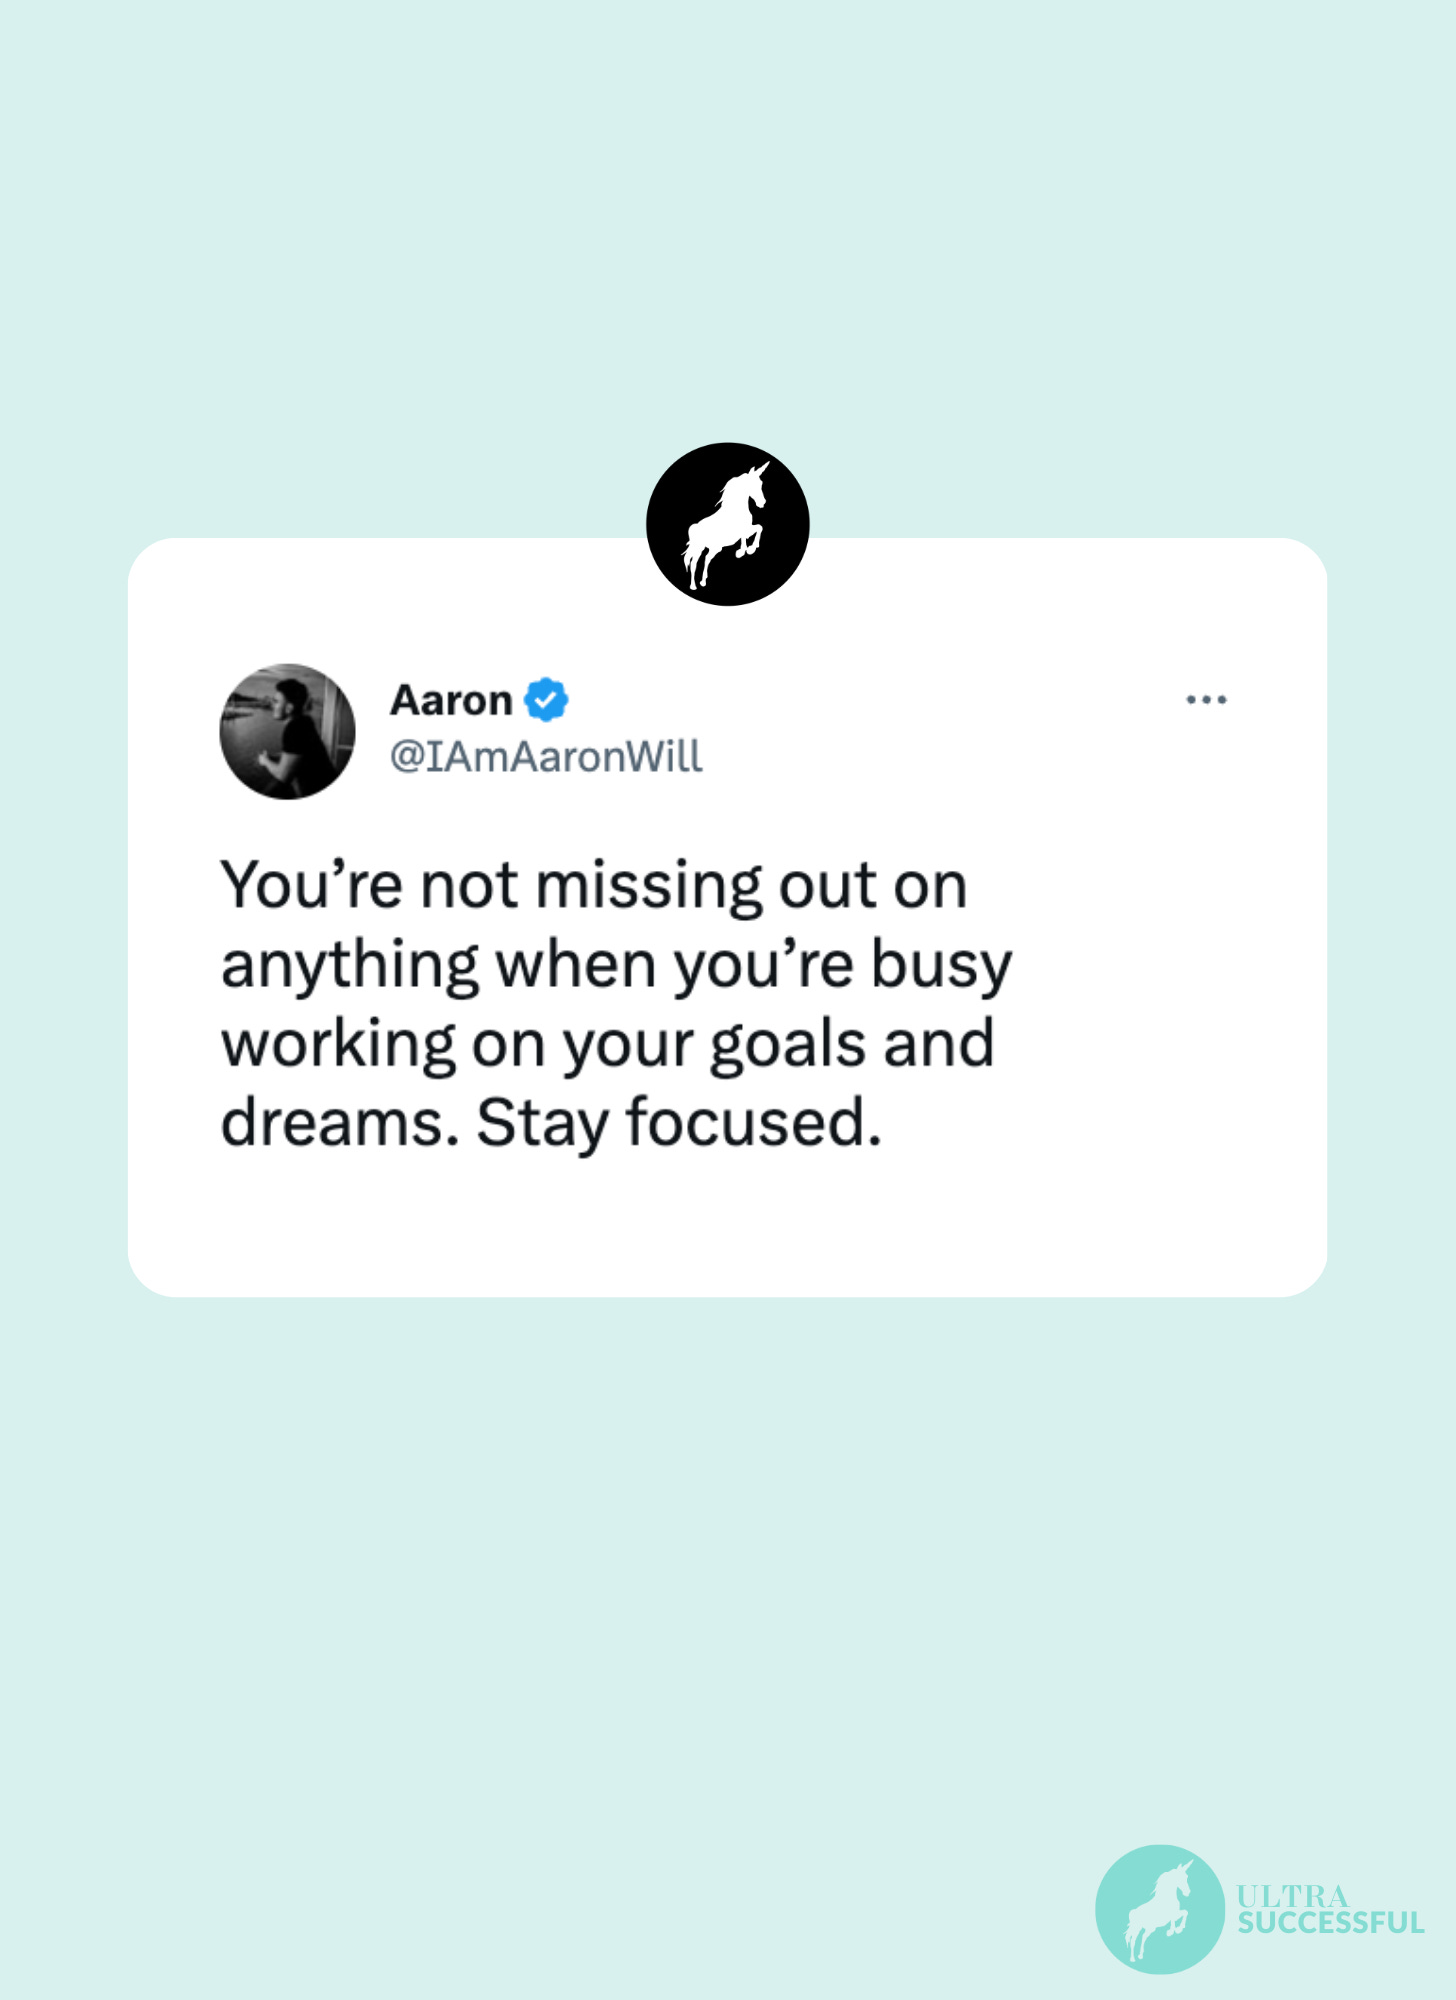 @IAmAaronWill: You’re not missing out on anything when you’re busy working on your goals and dreams. Stay focused.